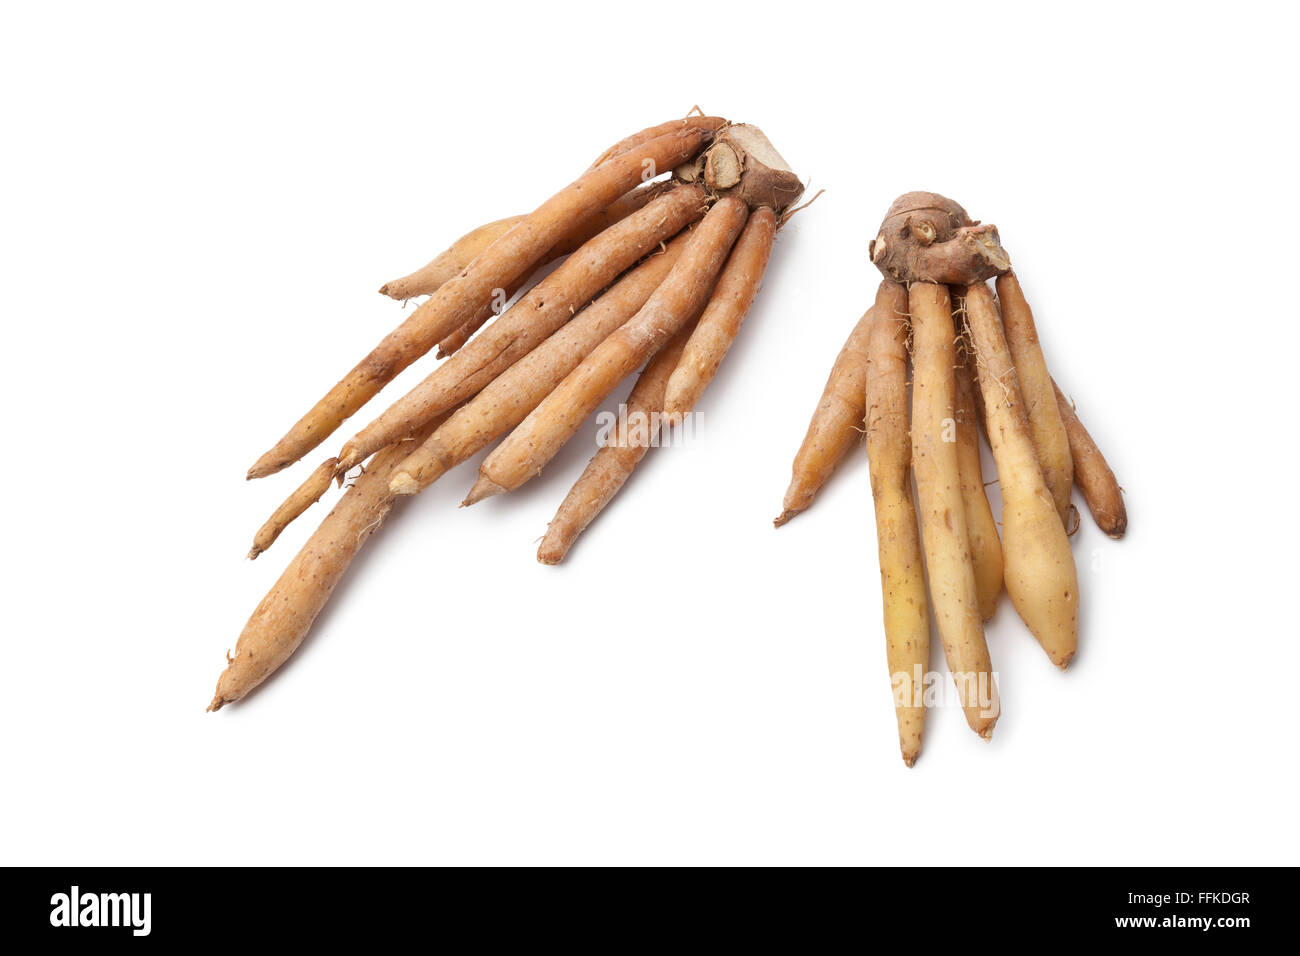 Thai Ginger High Resolution Stock Photography and Images - Alamy